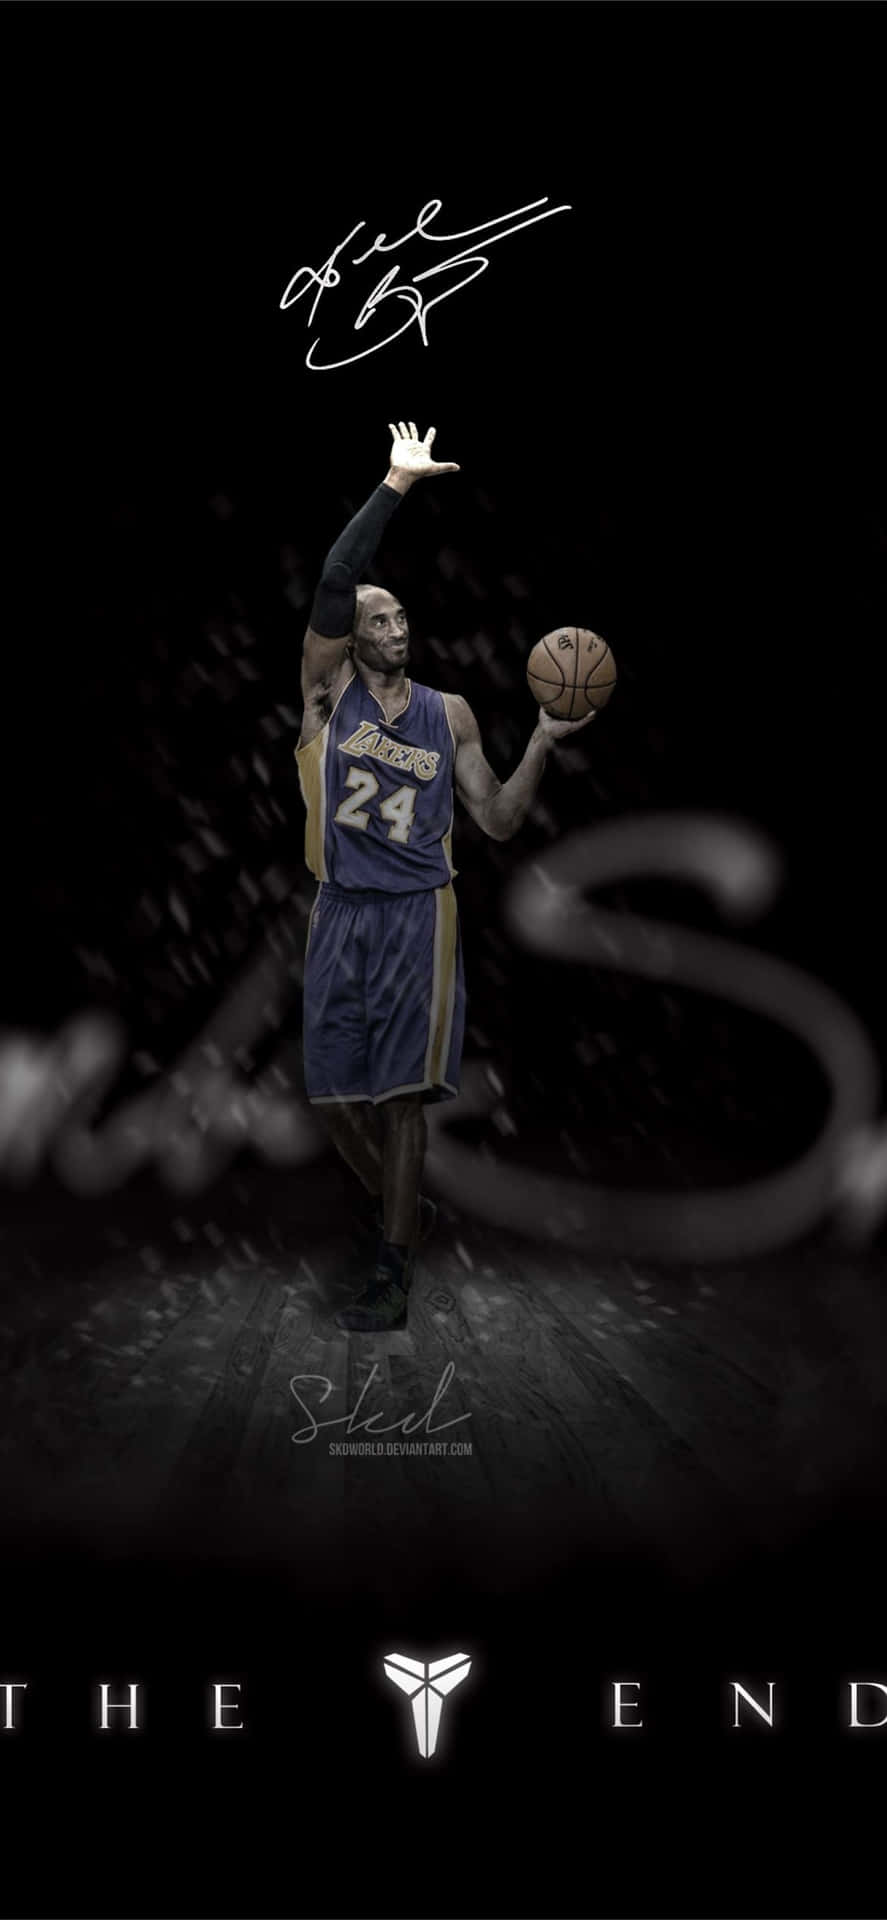 Download Kobe Bryant Dribbling The Ball During A Match Wallpaper ...